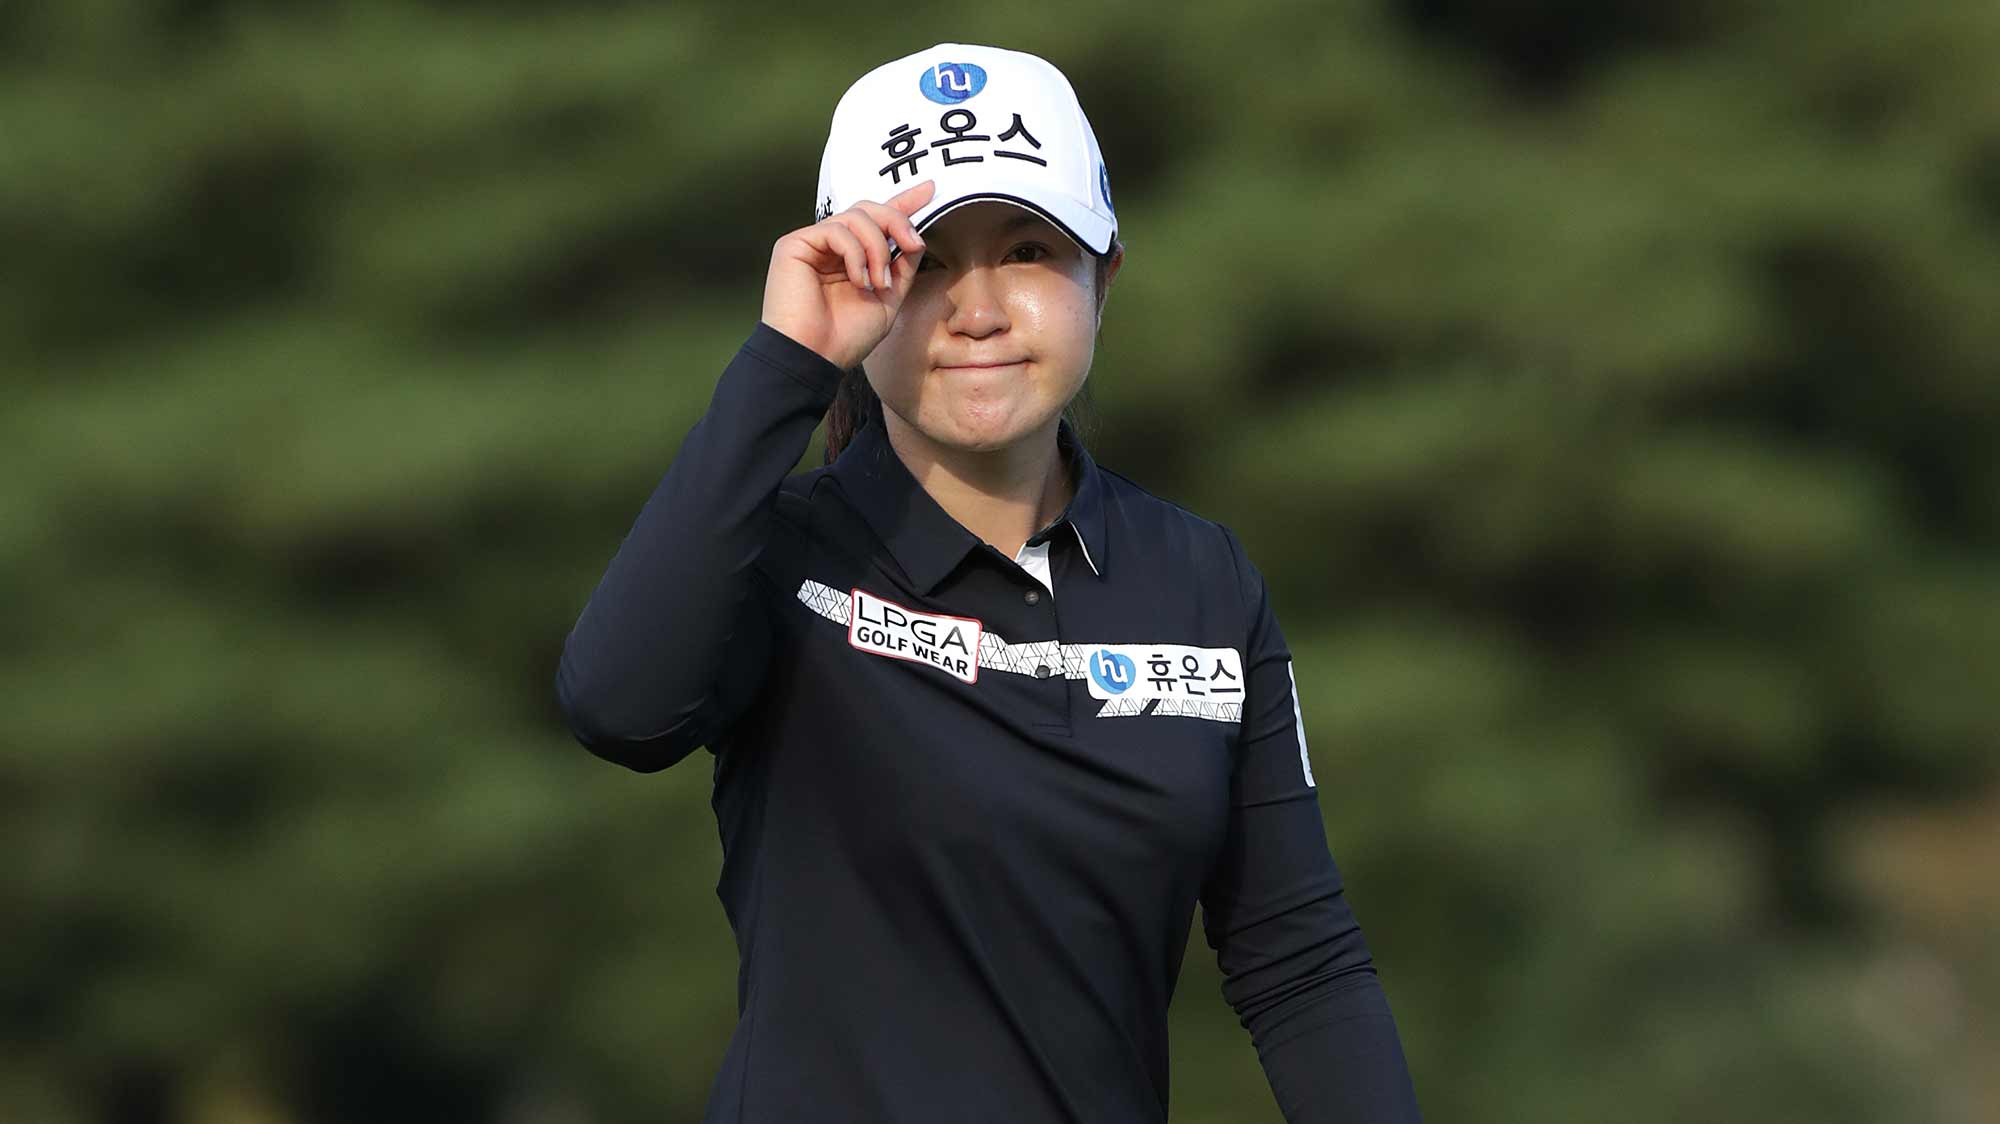  Seung Yeon Lee of Republic of Korea acknowledges the gallery on the eighteenth hole during Round 3 of 2019 BMW Ladies Championship at LPGA International Busan on October 26, 2019 in Busan, Republic of Korea